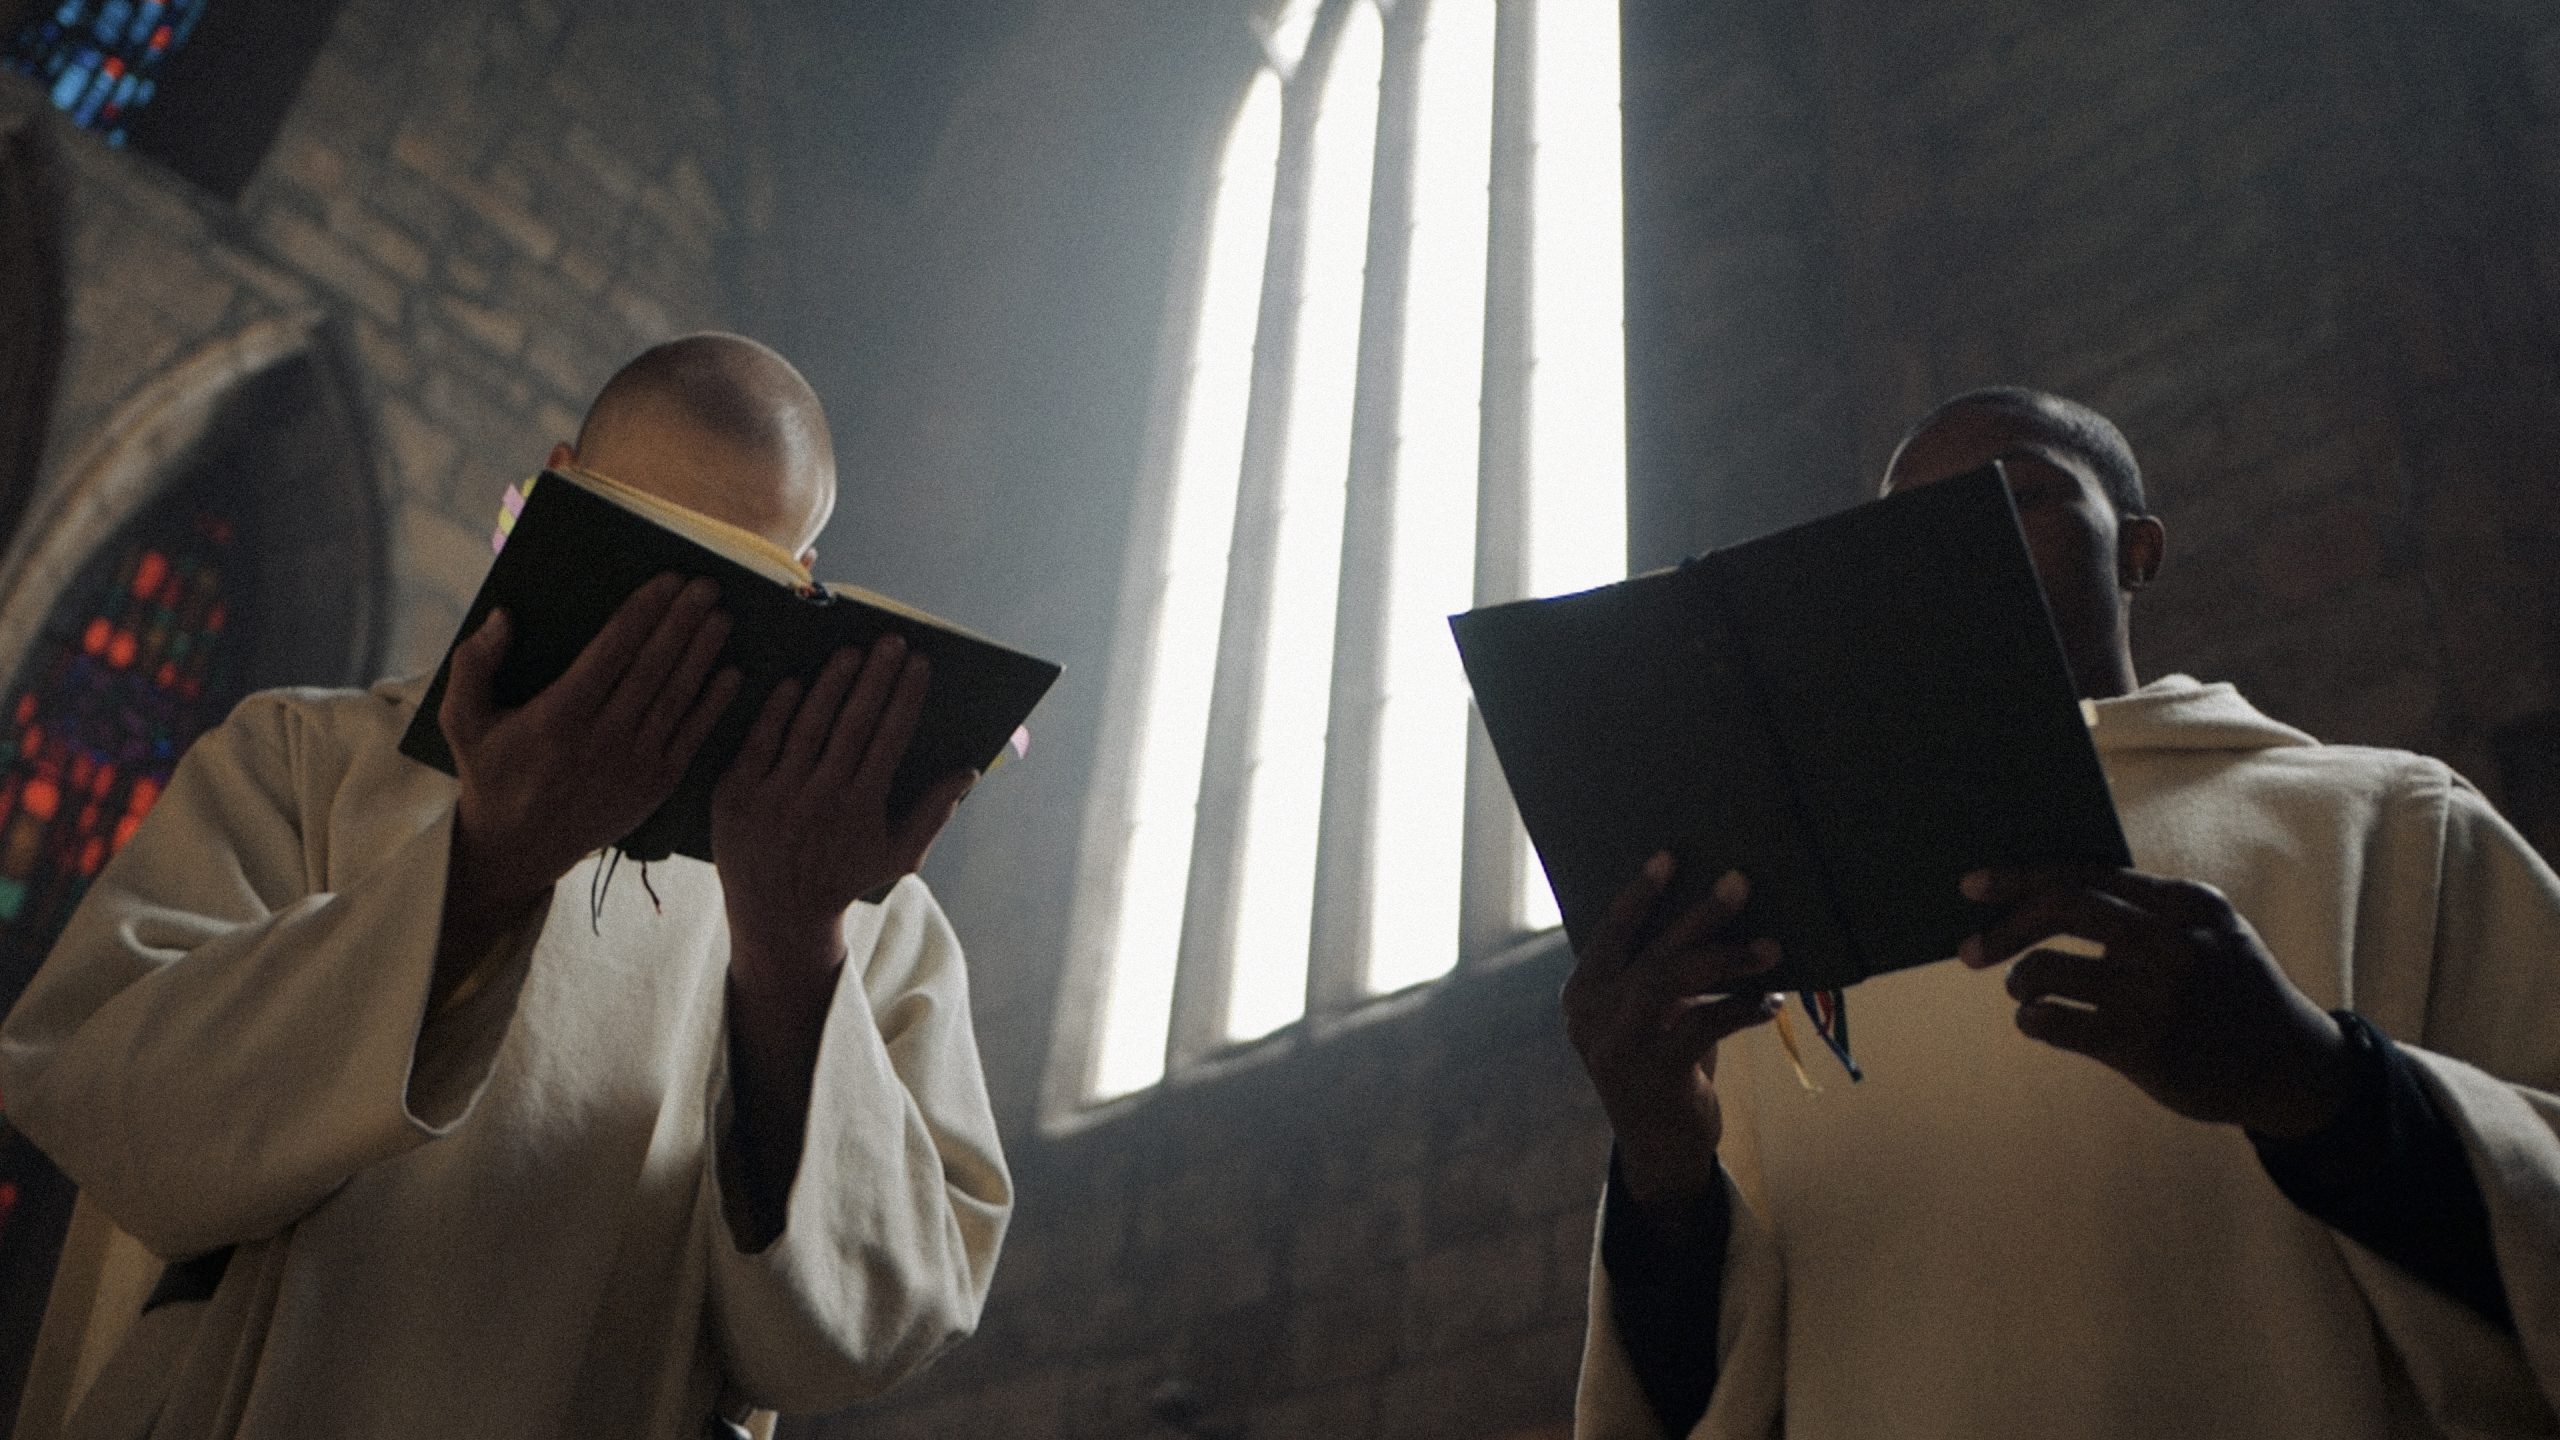 Soulful Fusion: Tom Donald & The Monks of Pluscarden Abbey Unite in ‘Pax Aeterna’